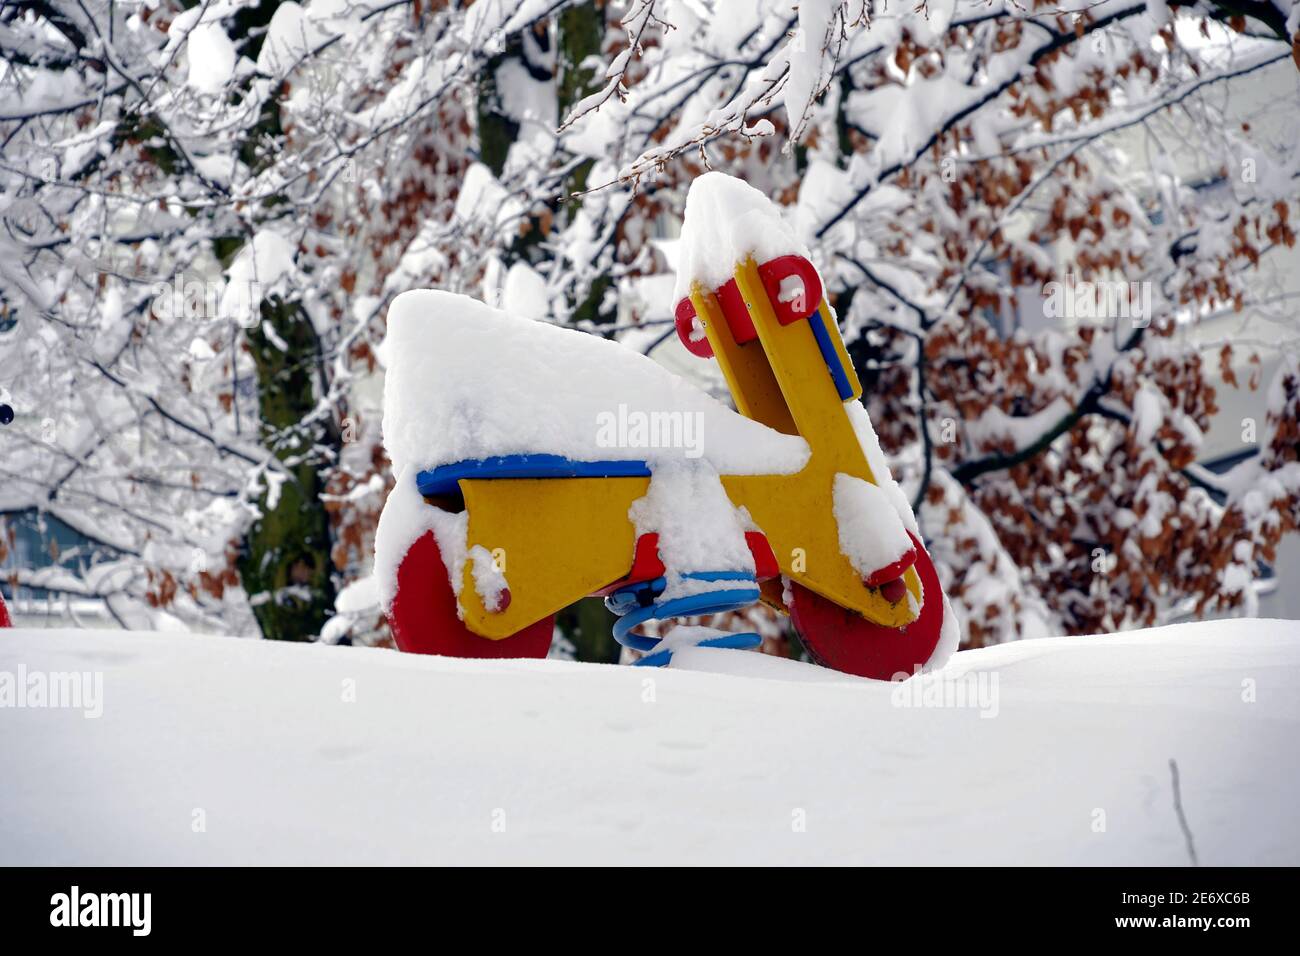 Rocking motorcycle on a spring, wooden toy in red and yellow  in garden in winter, with  snow covered trees on the background in extreme snowfall. Stock Photo